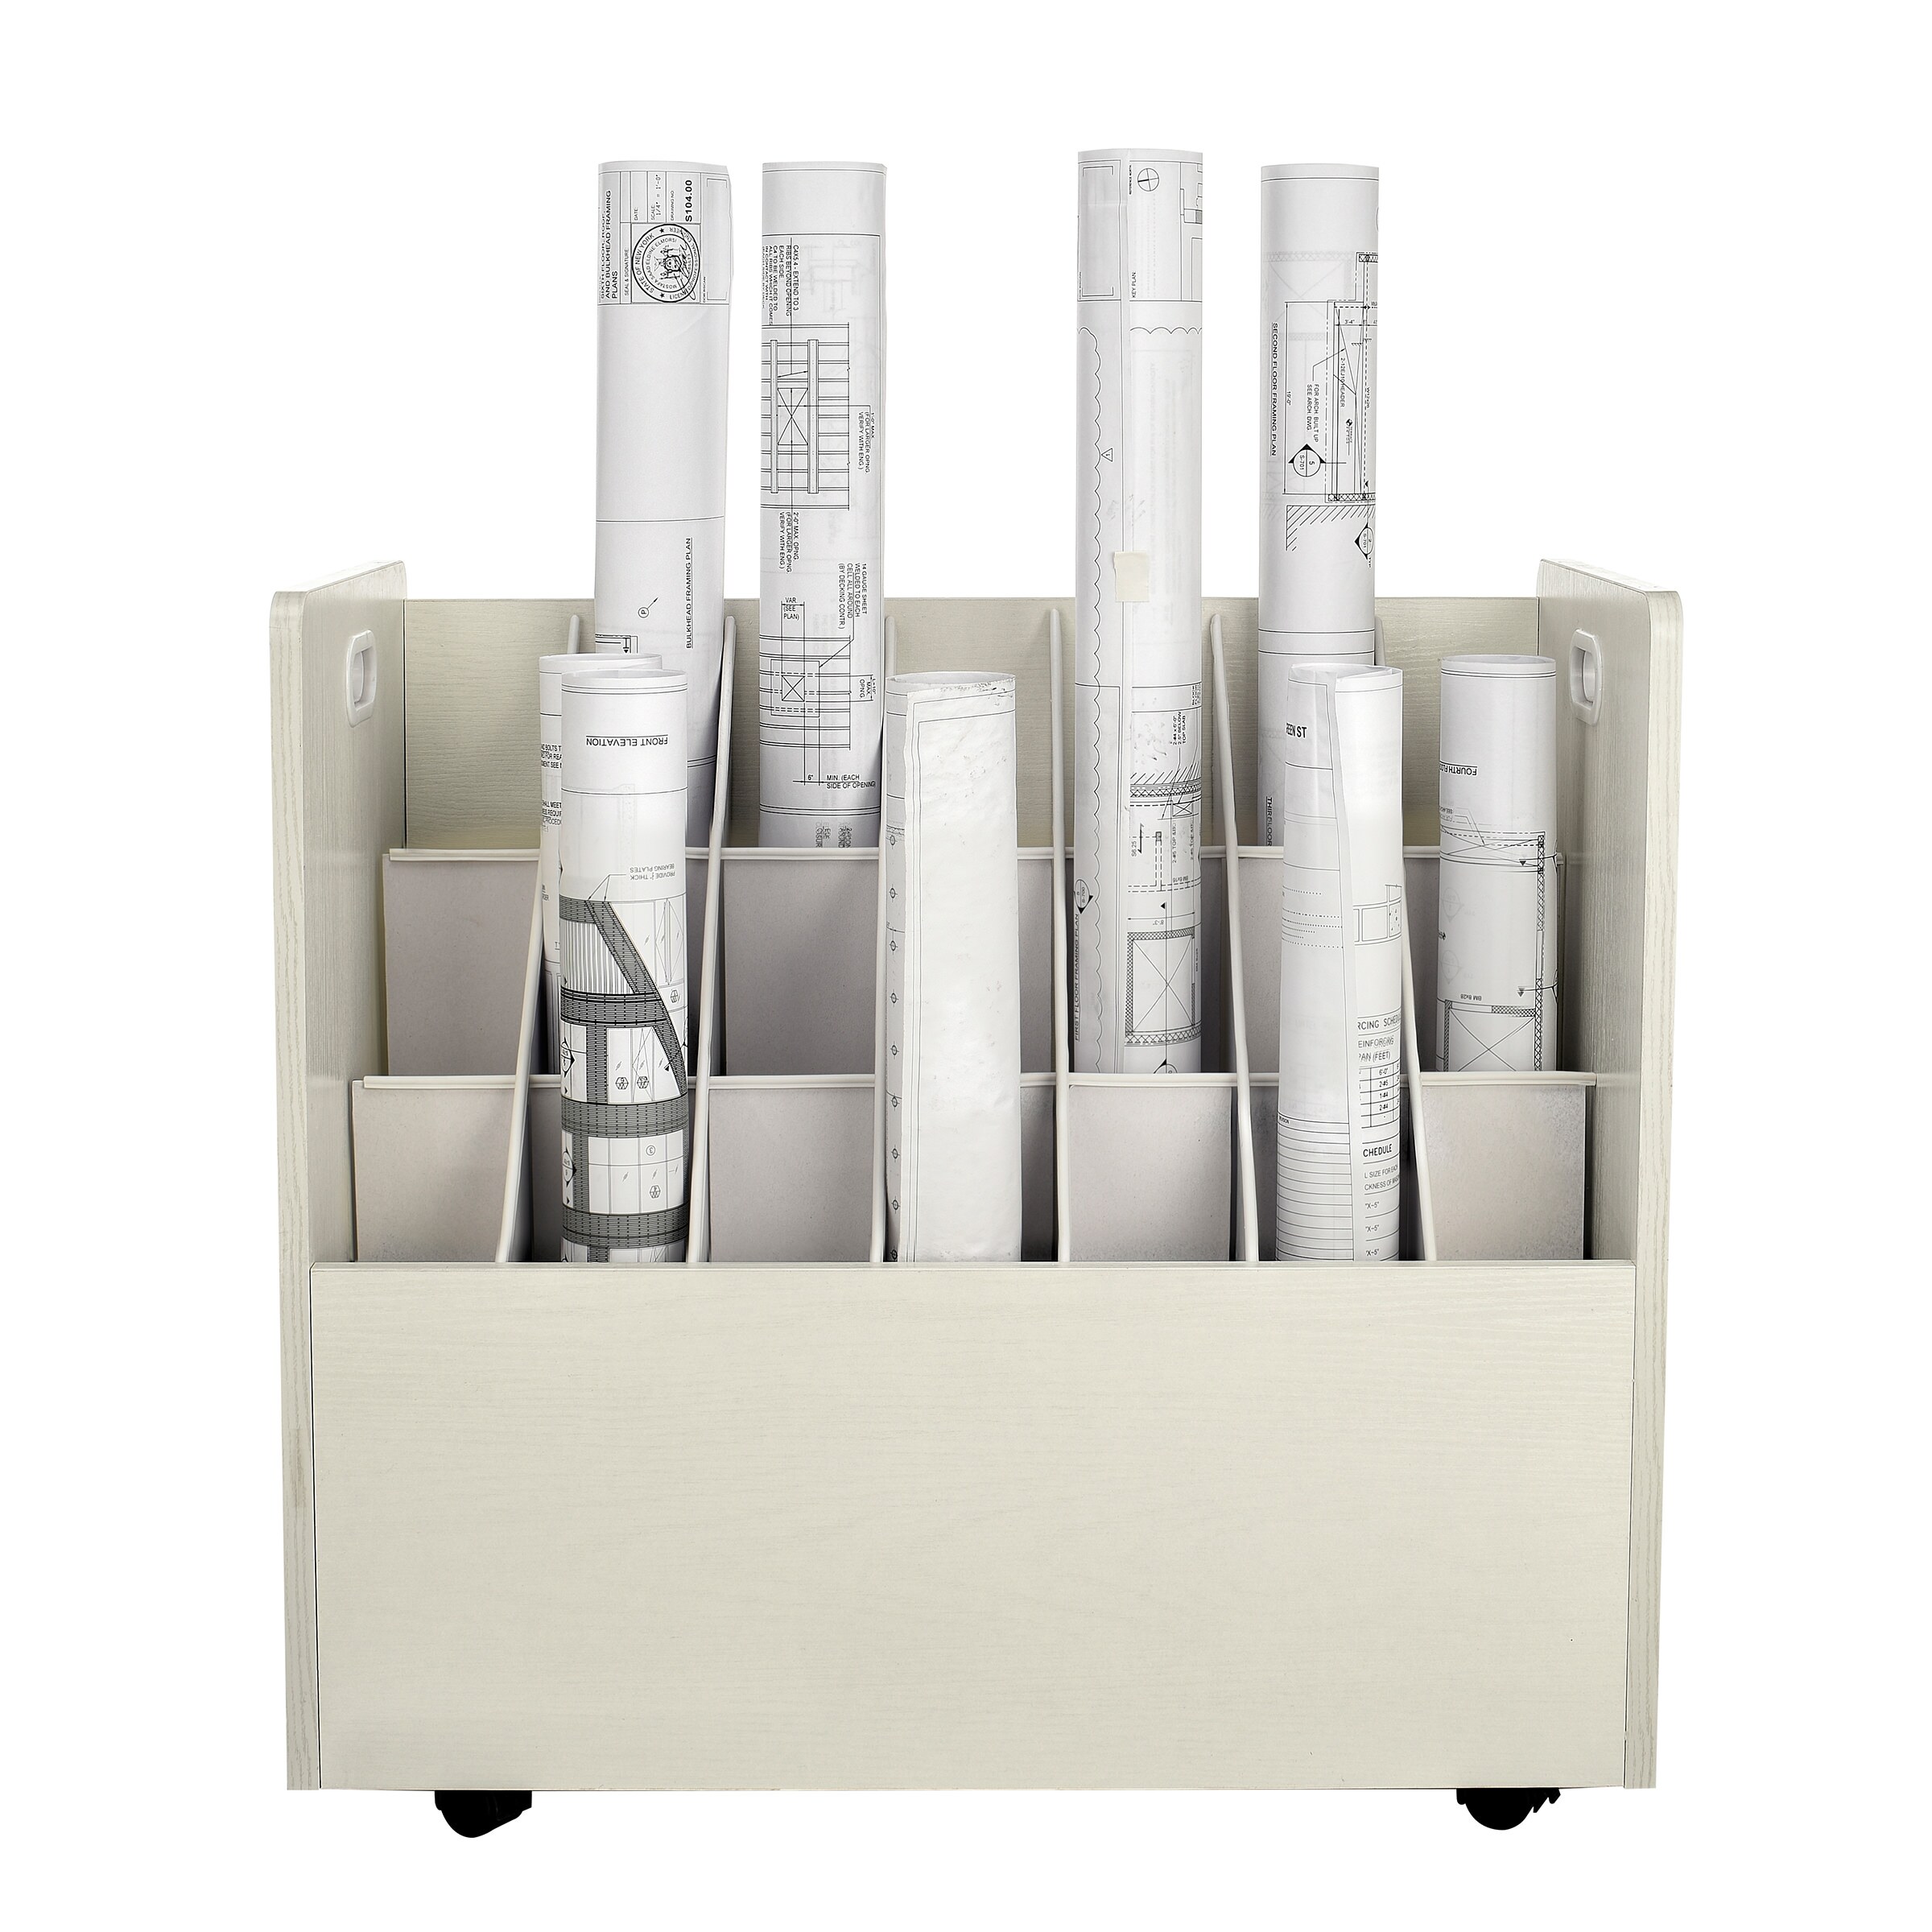 AdirOffice Mobile Wood Blueprint Roll File Sturdy Heavy Duty Large Document Organizer 21 Slots, White Convenient Storage for Home Office or School Use 